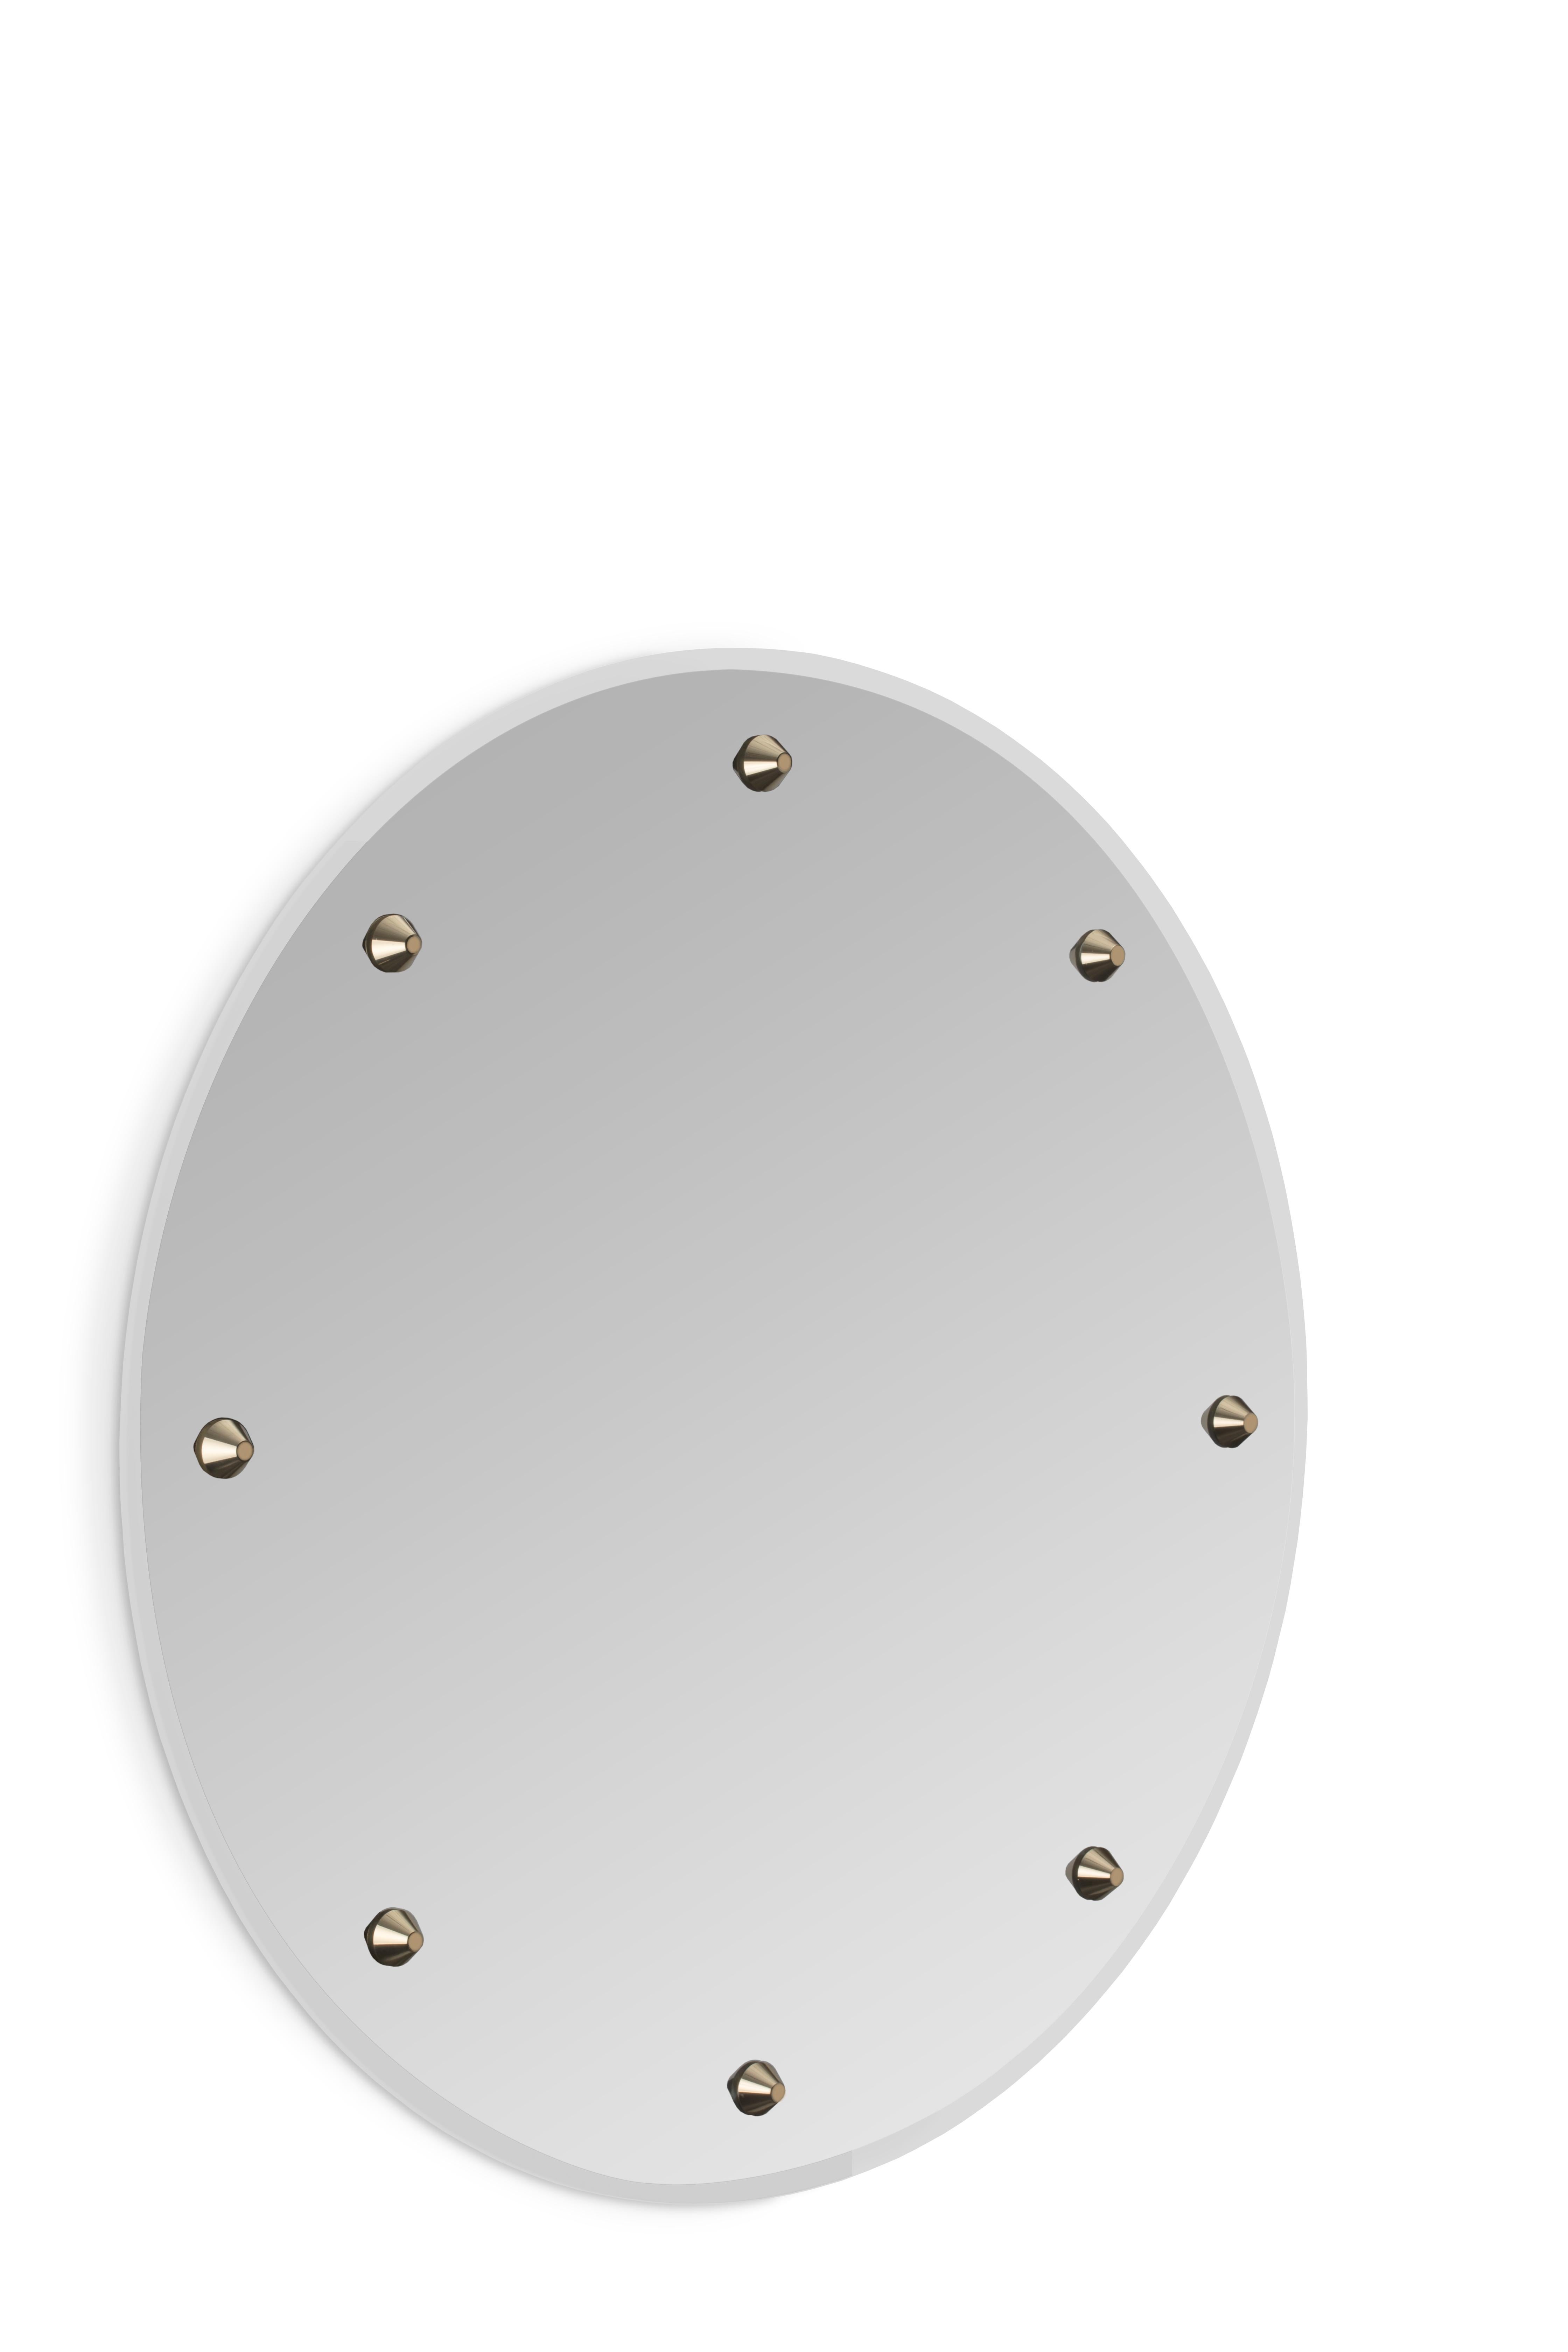 Glimmer mirror, as its name states, adds to your project a faint and elegant light. Glimmer Mirror's subtle lines and crystal details are the result of a precise handcrafted process. A precious piece of art with eight brass details adorned with